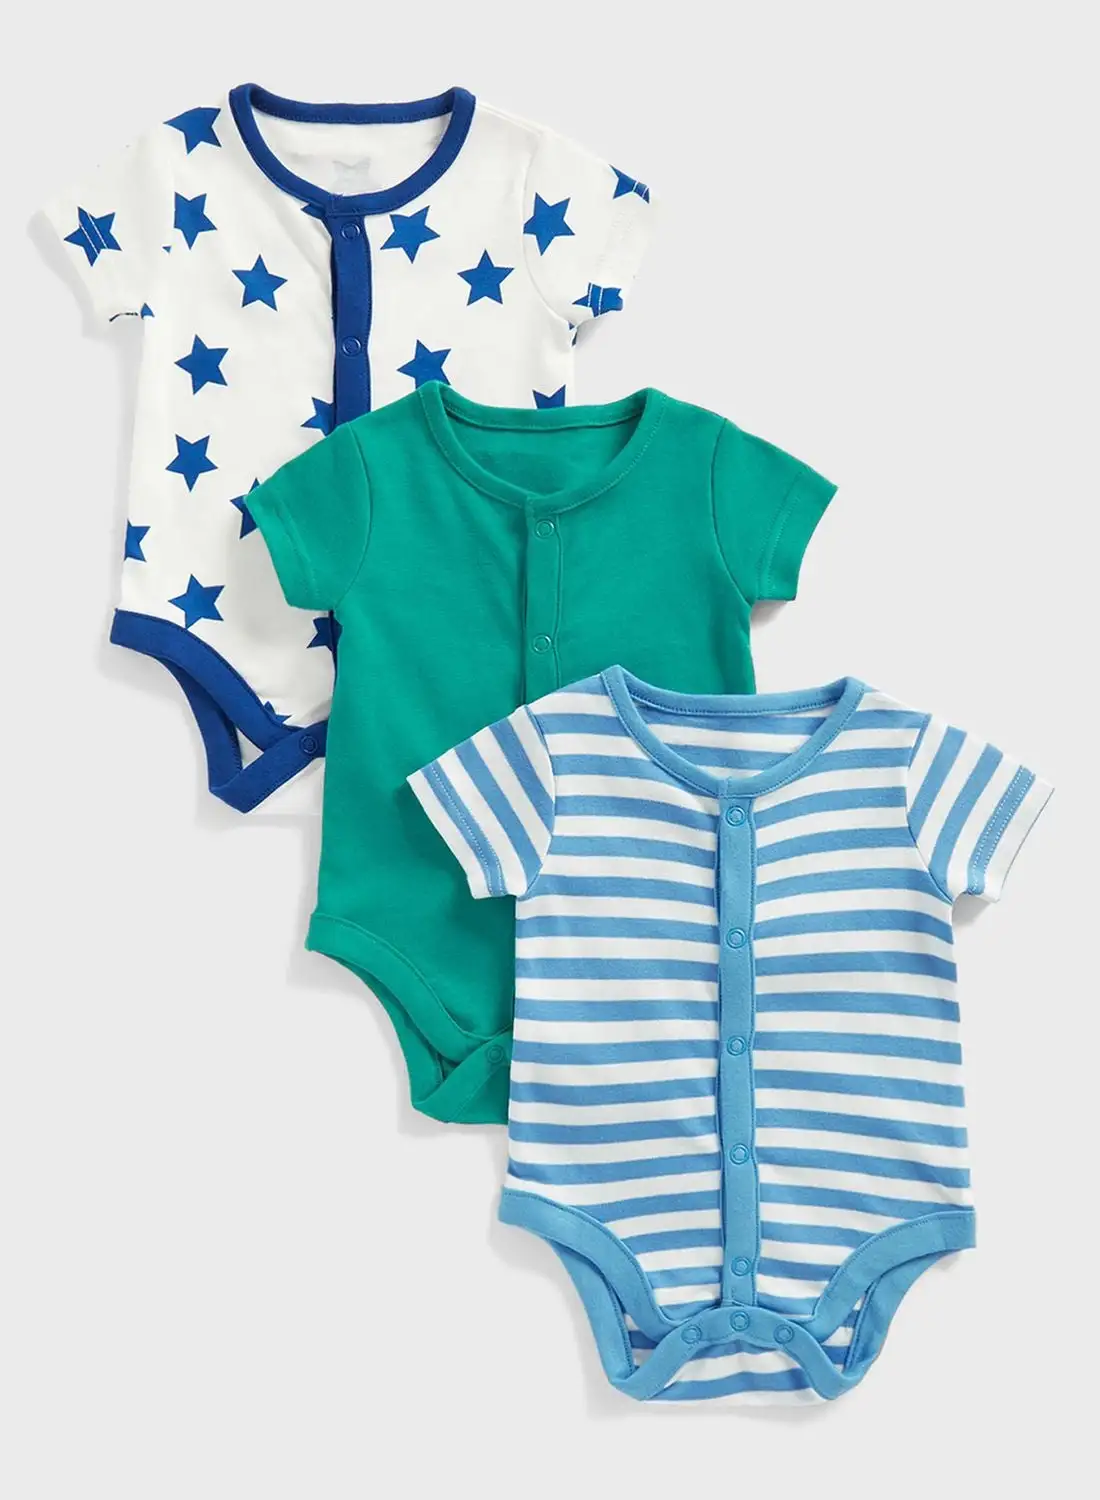 mothercare Kids 3 Pack Assorted Bodysuits